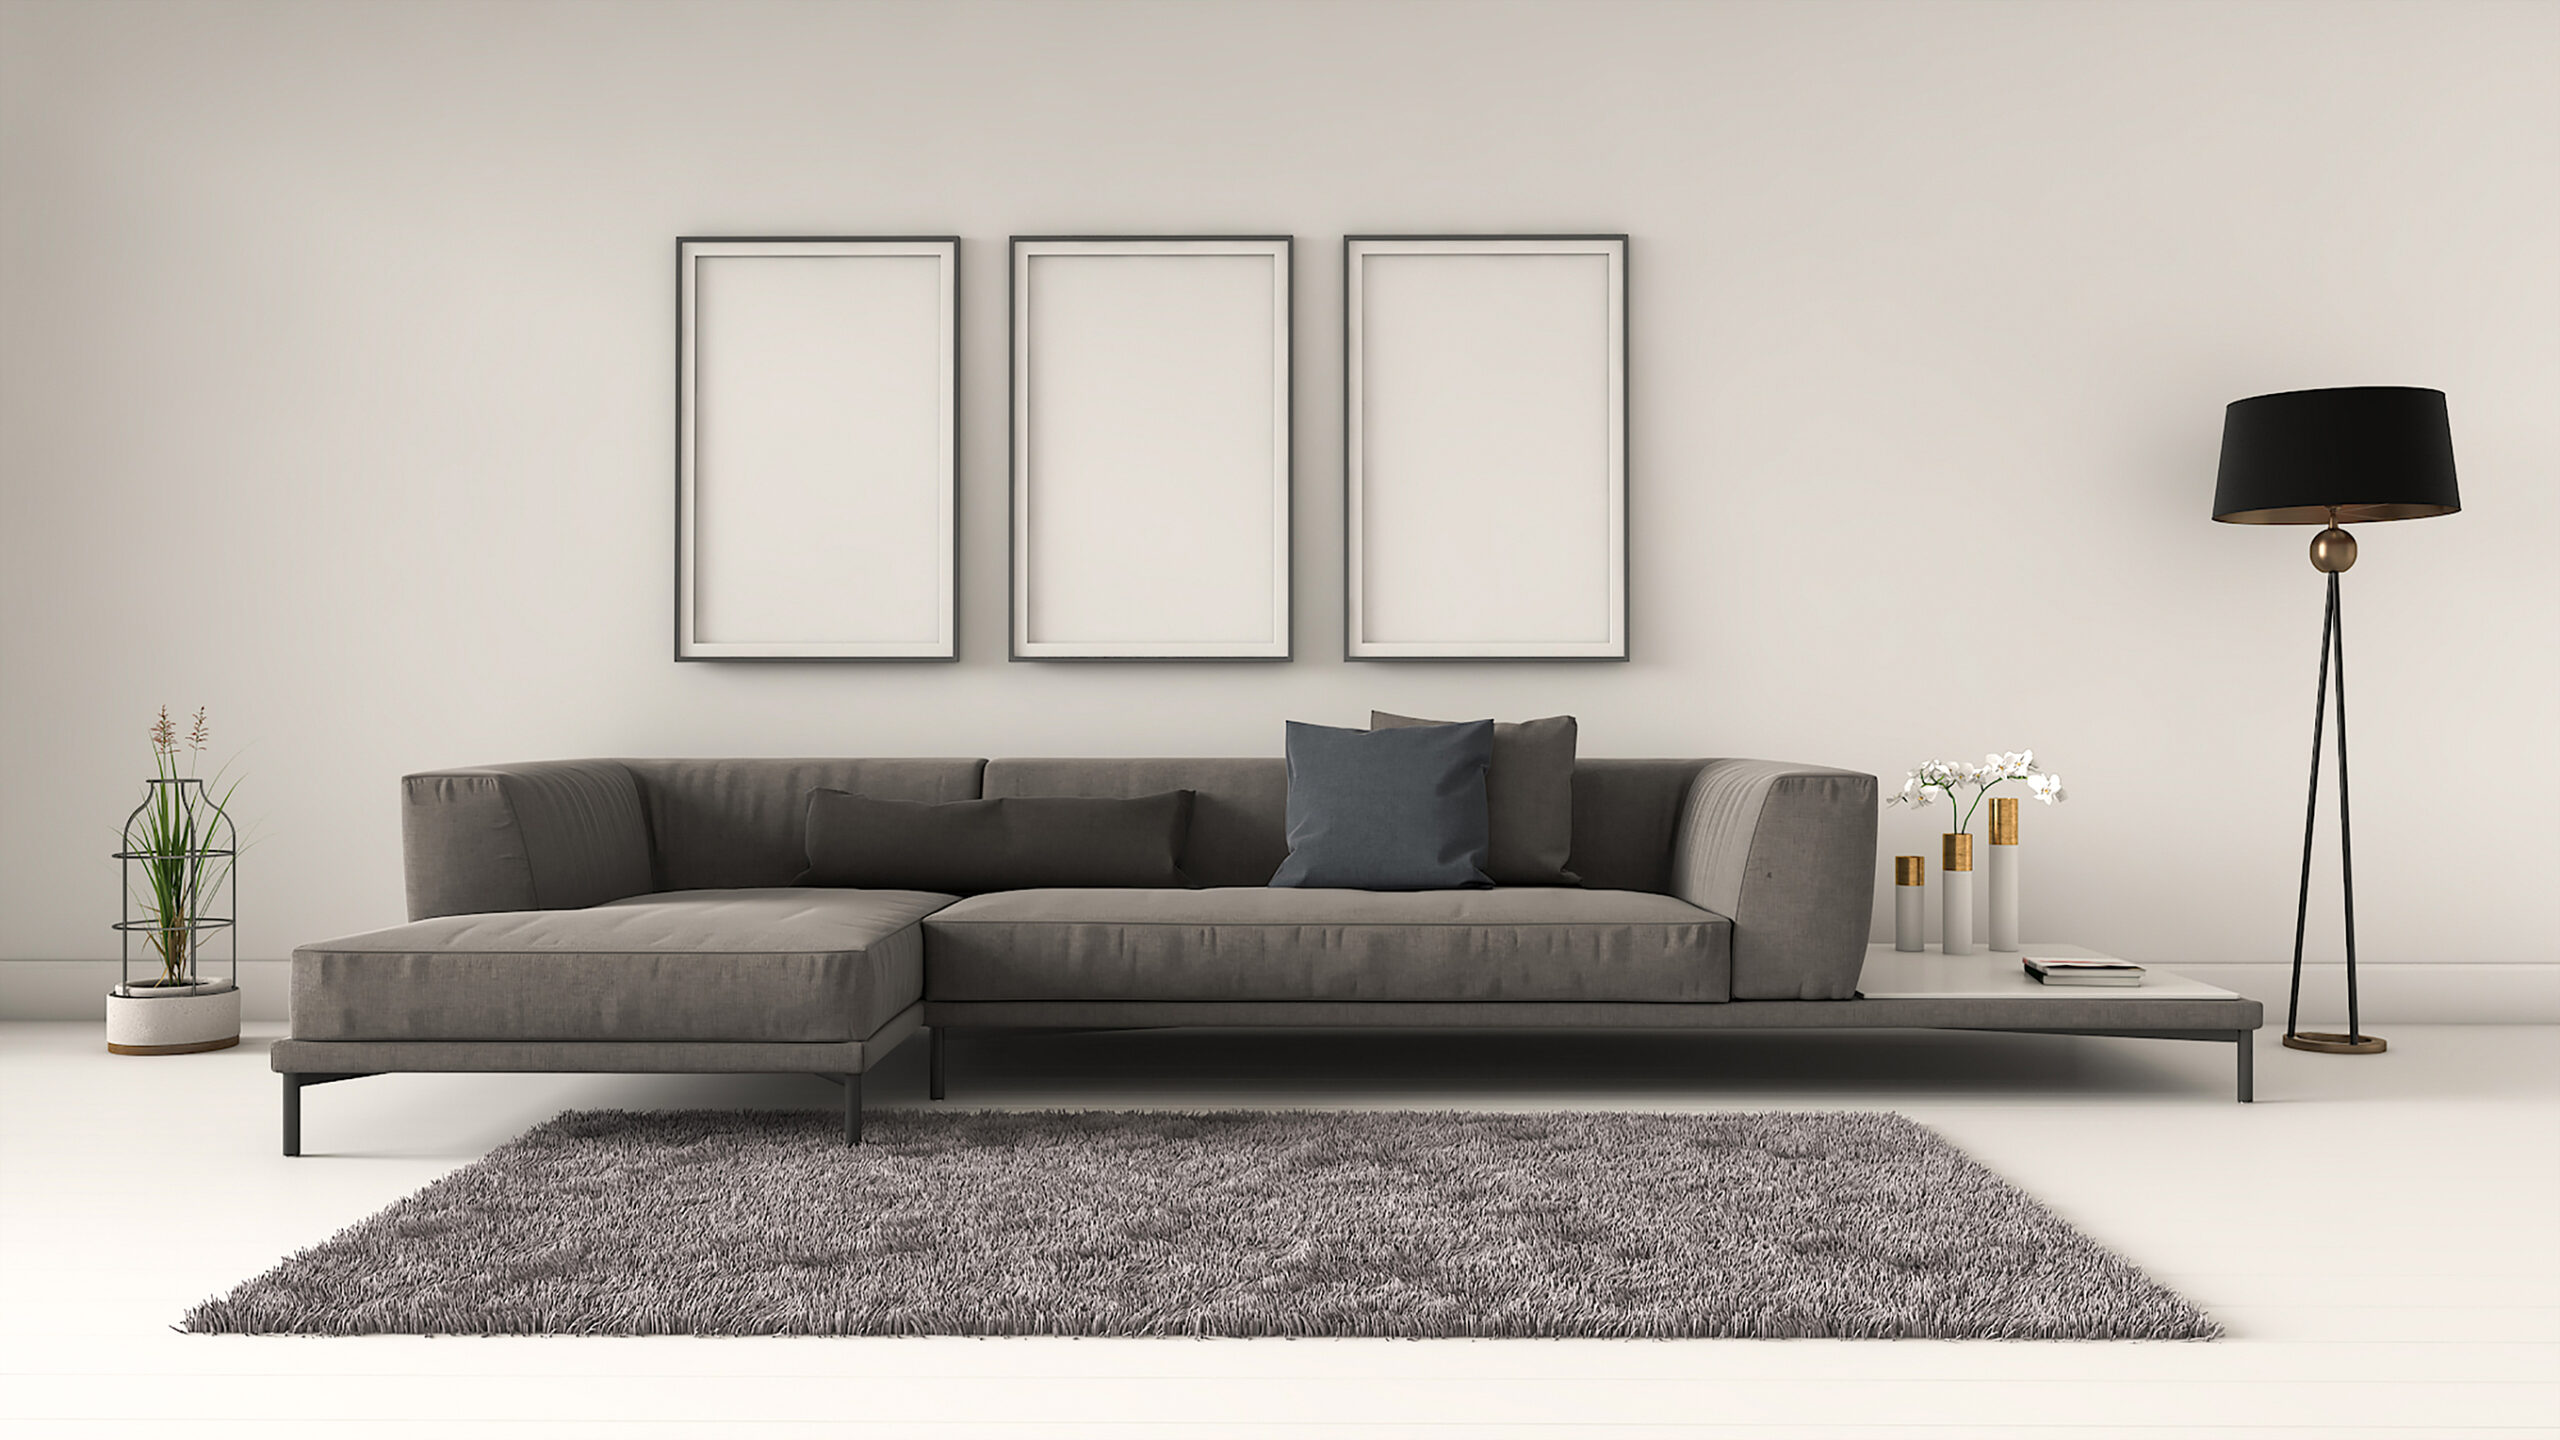 Living,Room,Interior,Poster,Mockup,With,Two,Vertical,Empty,Black